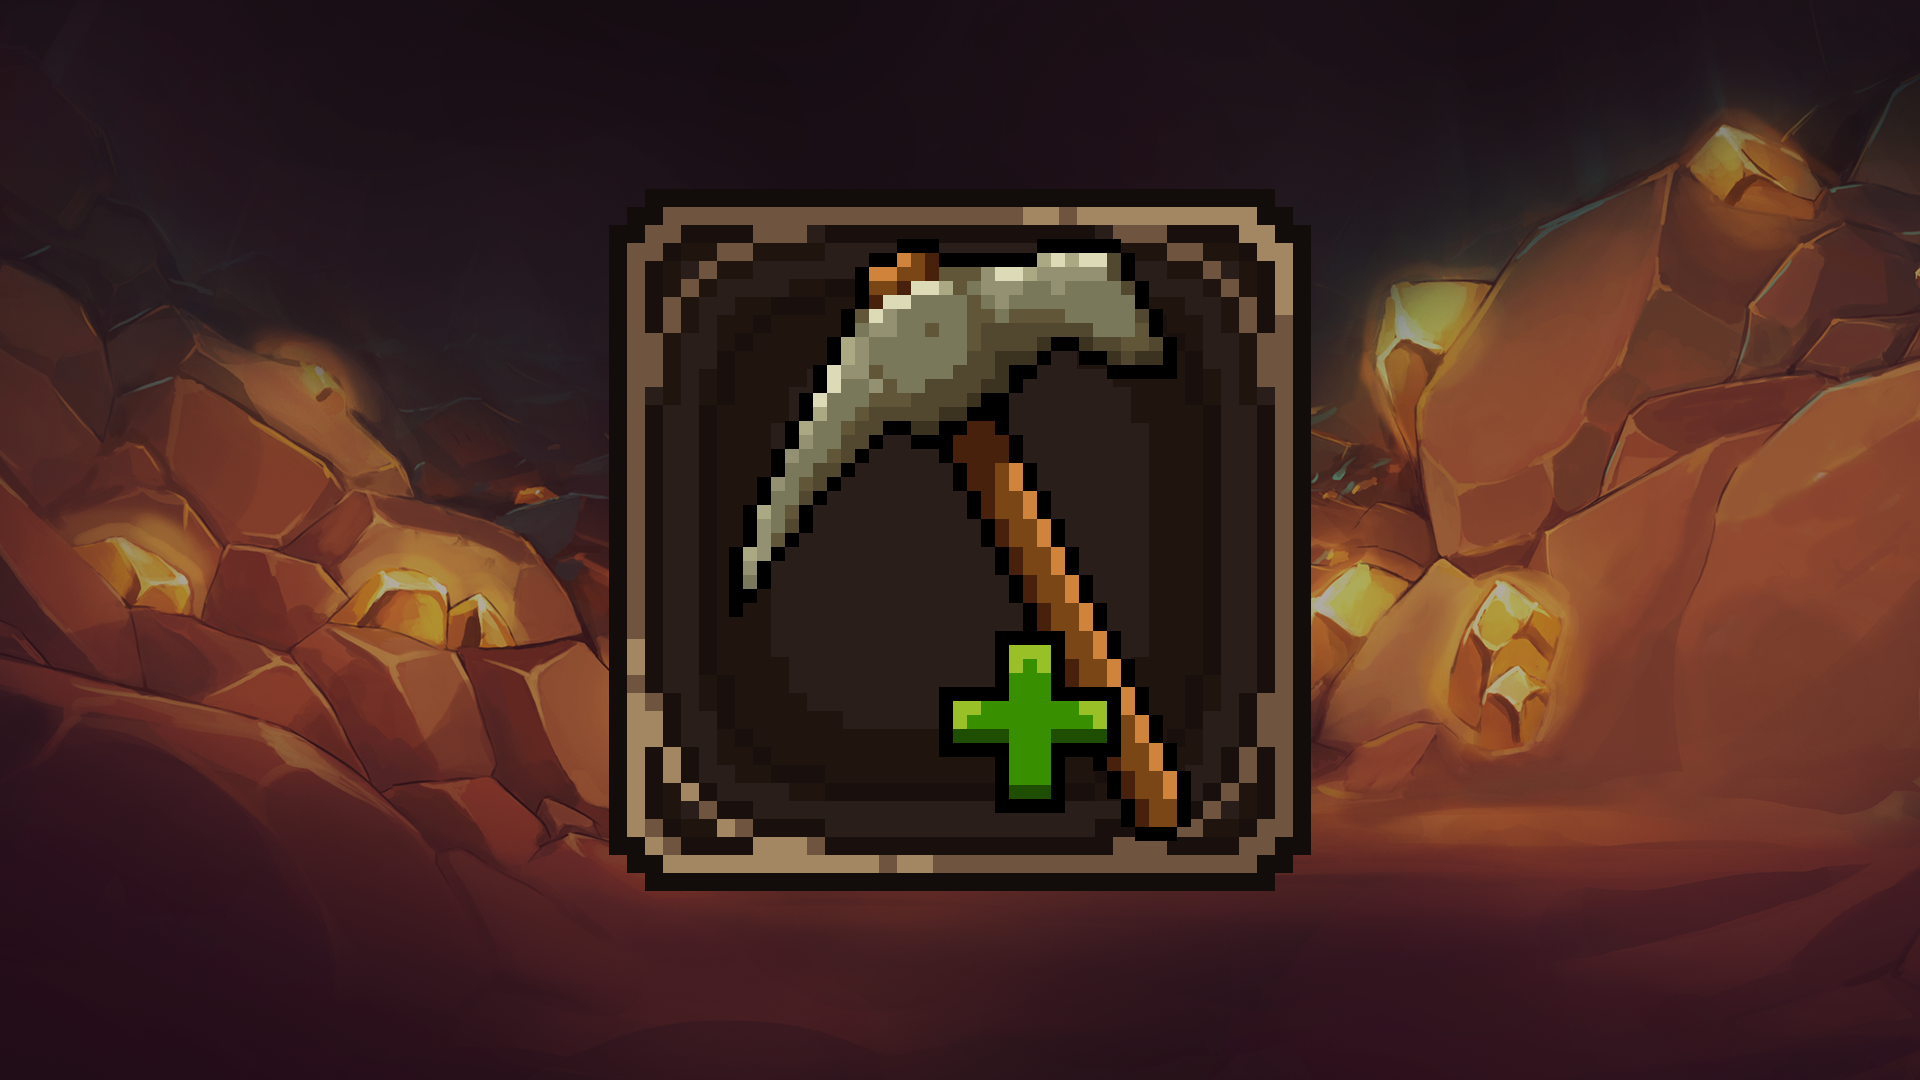 Icon for Trusty Pickaxe